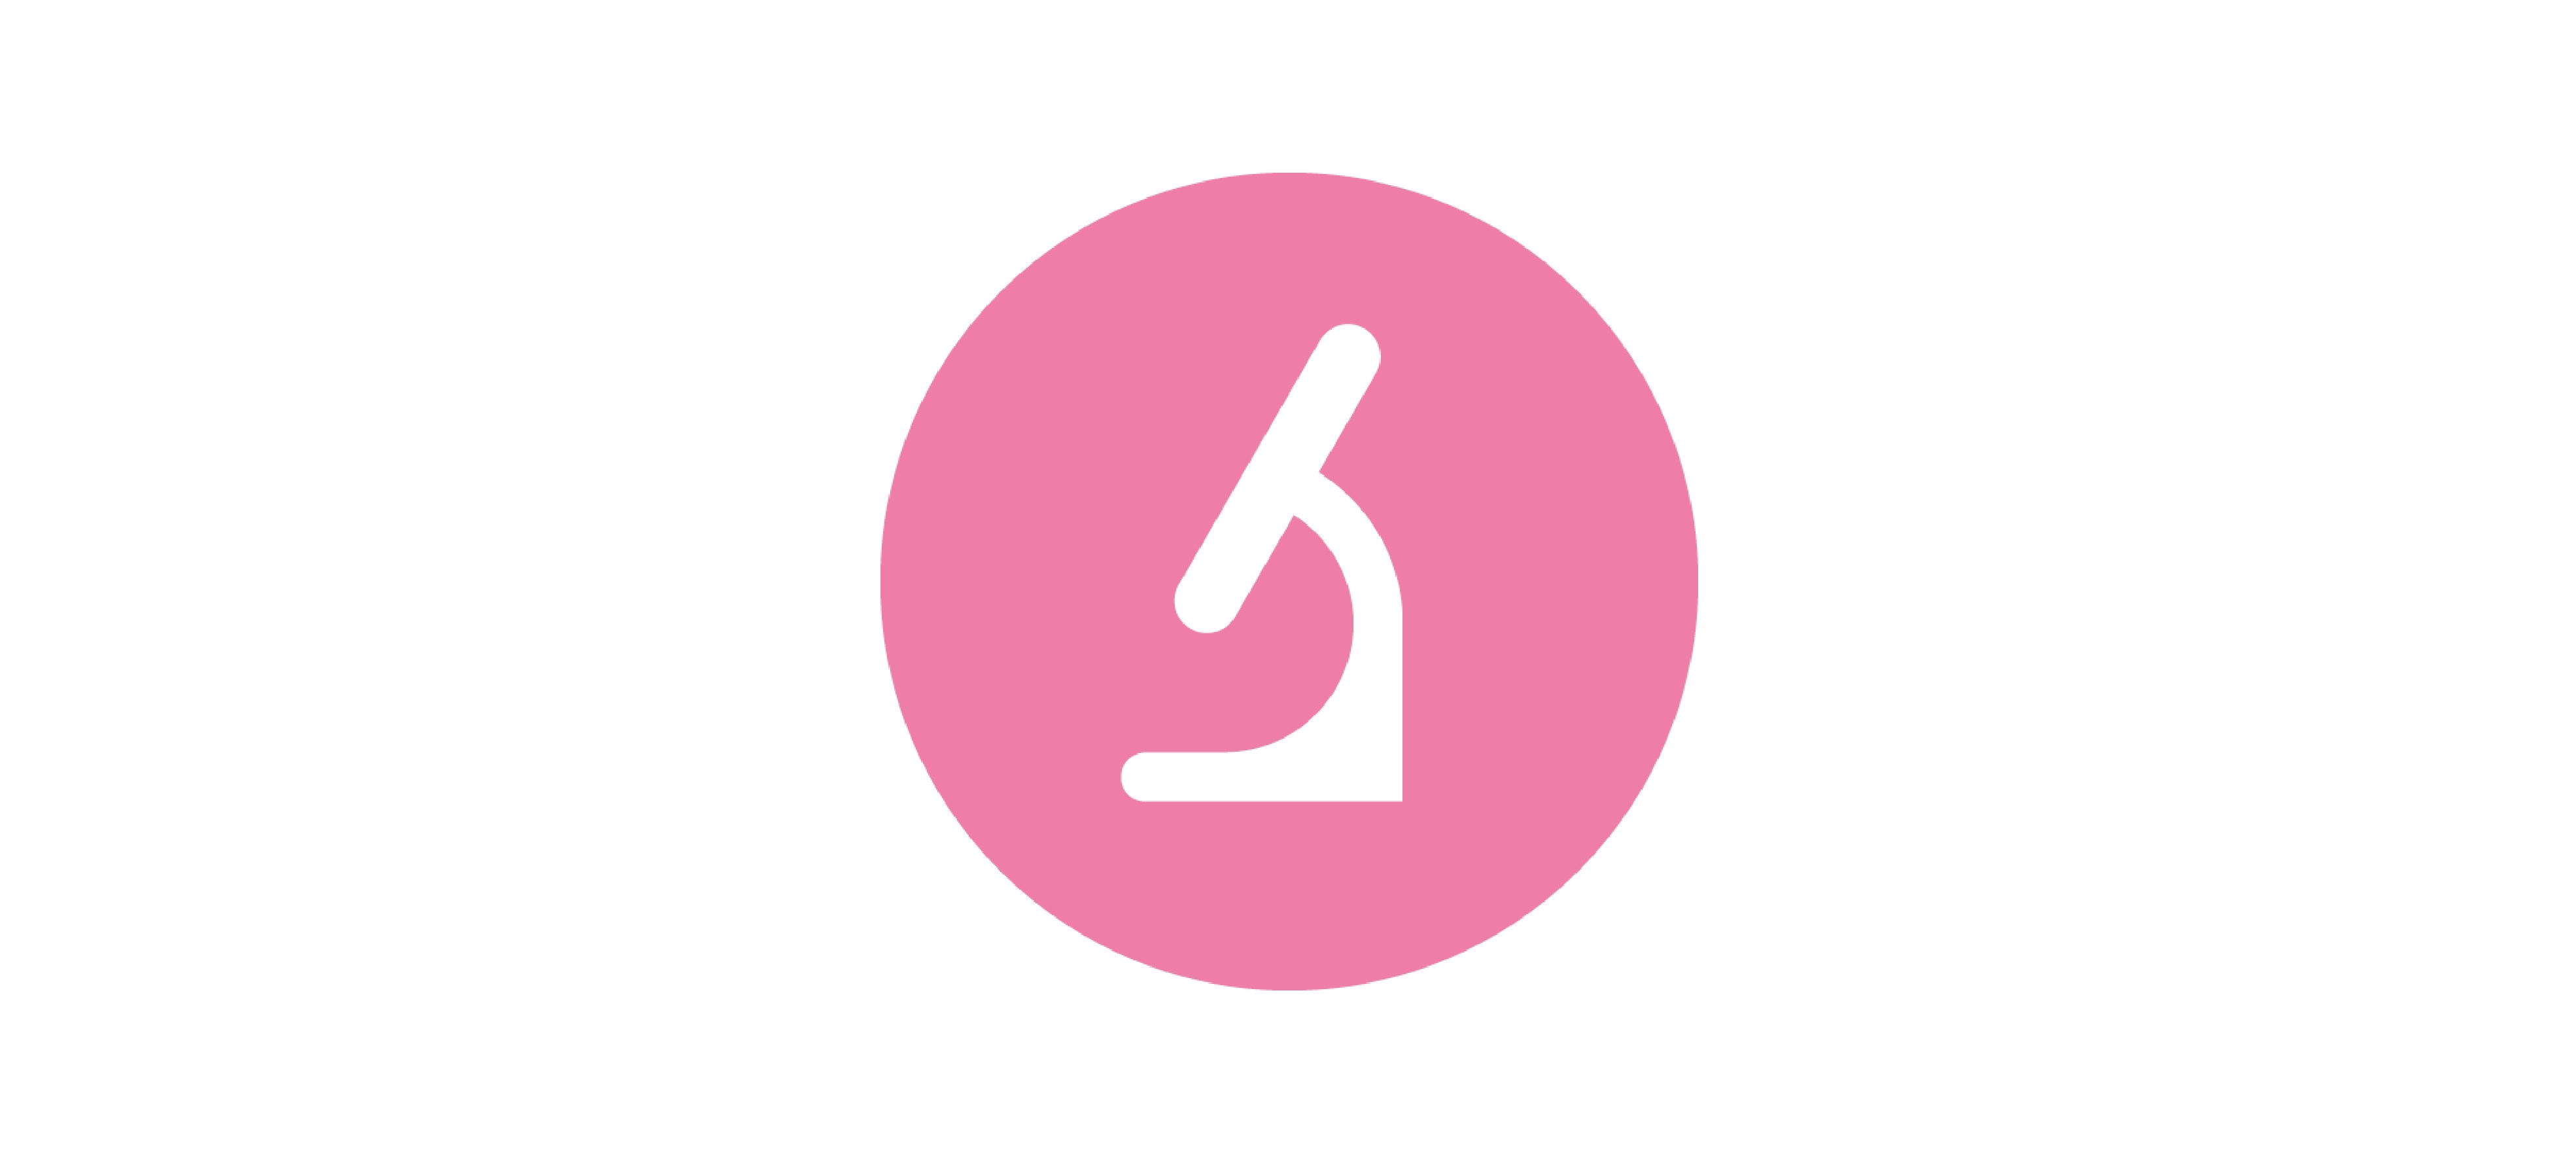 Pink icon of a microscope